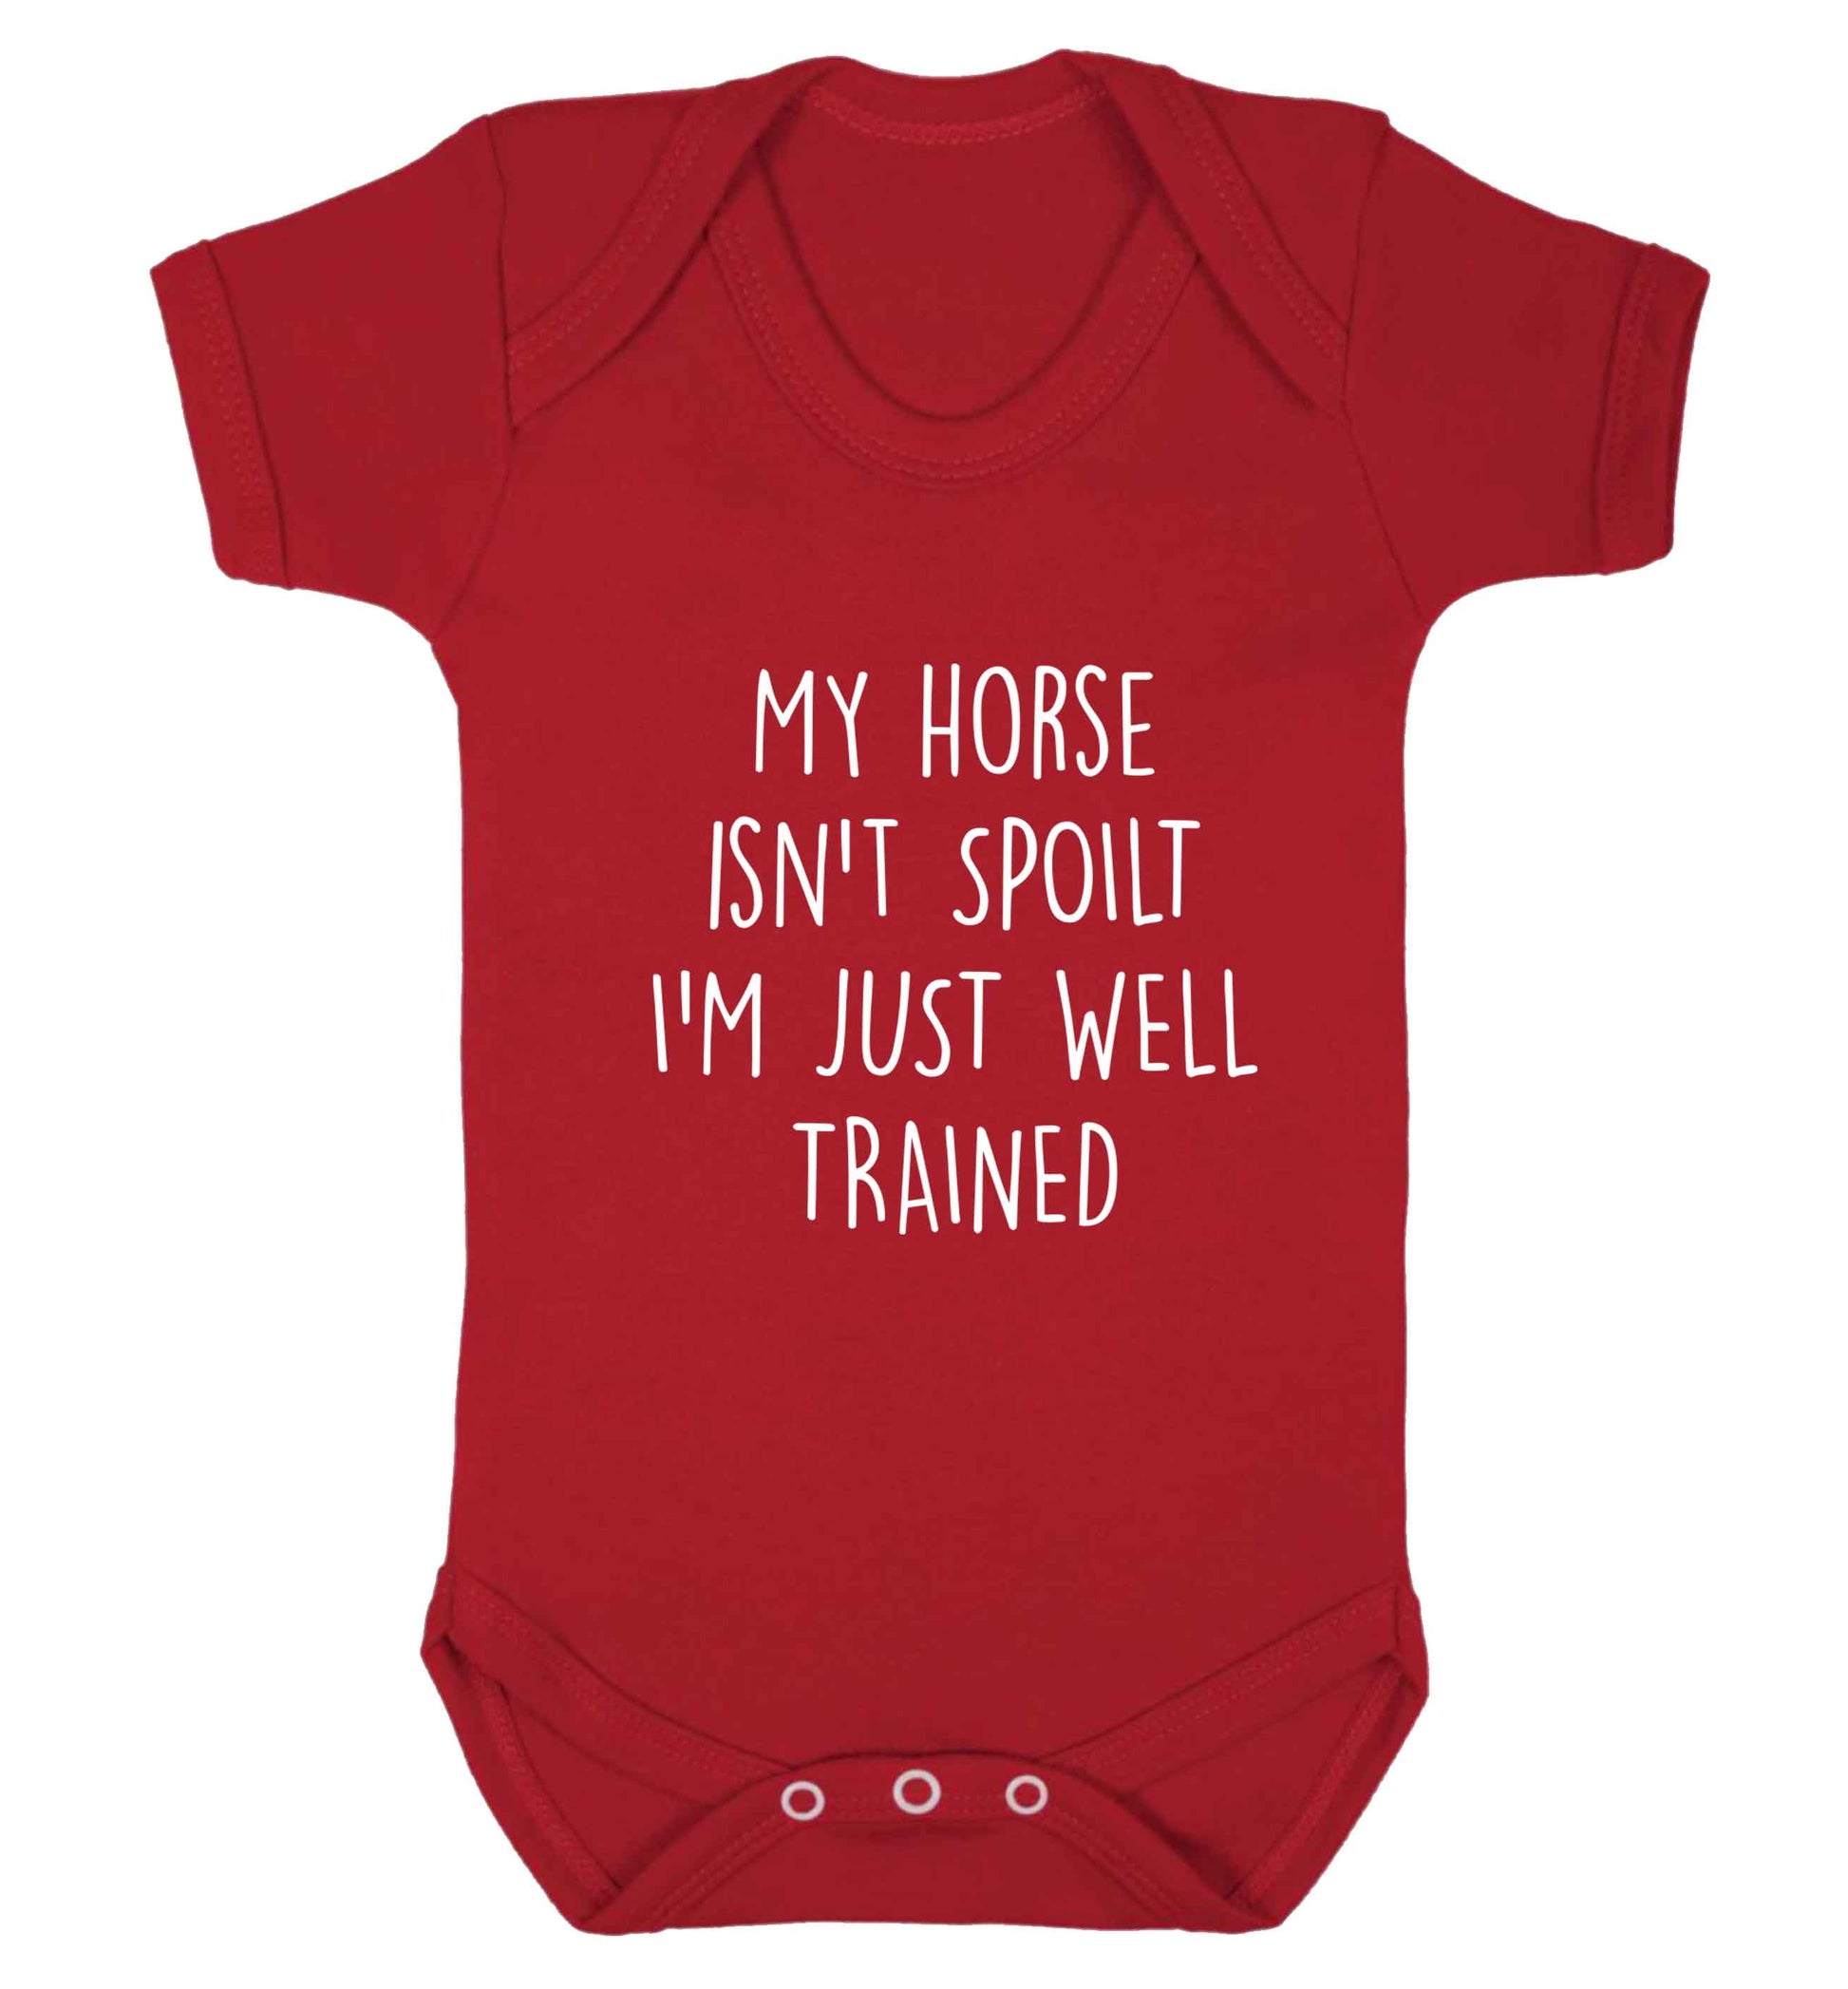 My horse isn't spoilt I'm just well trained baby vest red 18-24 months